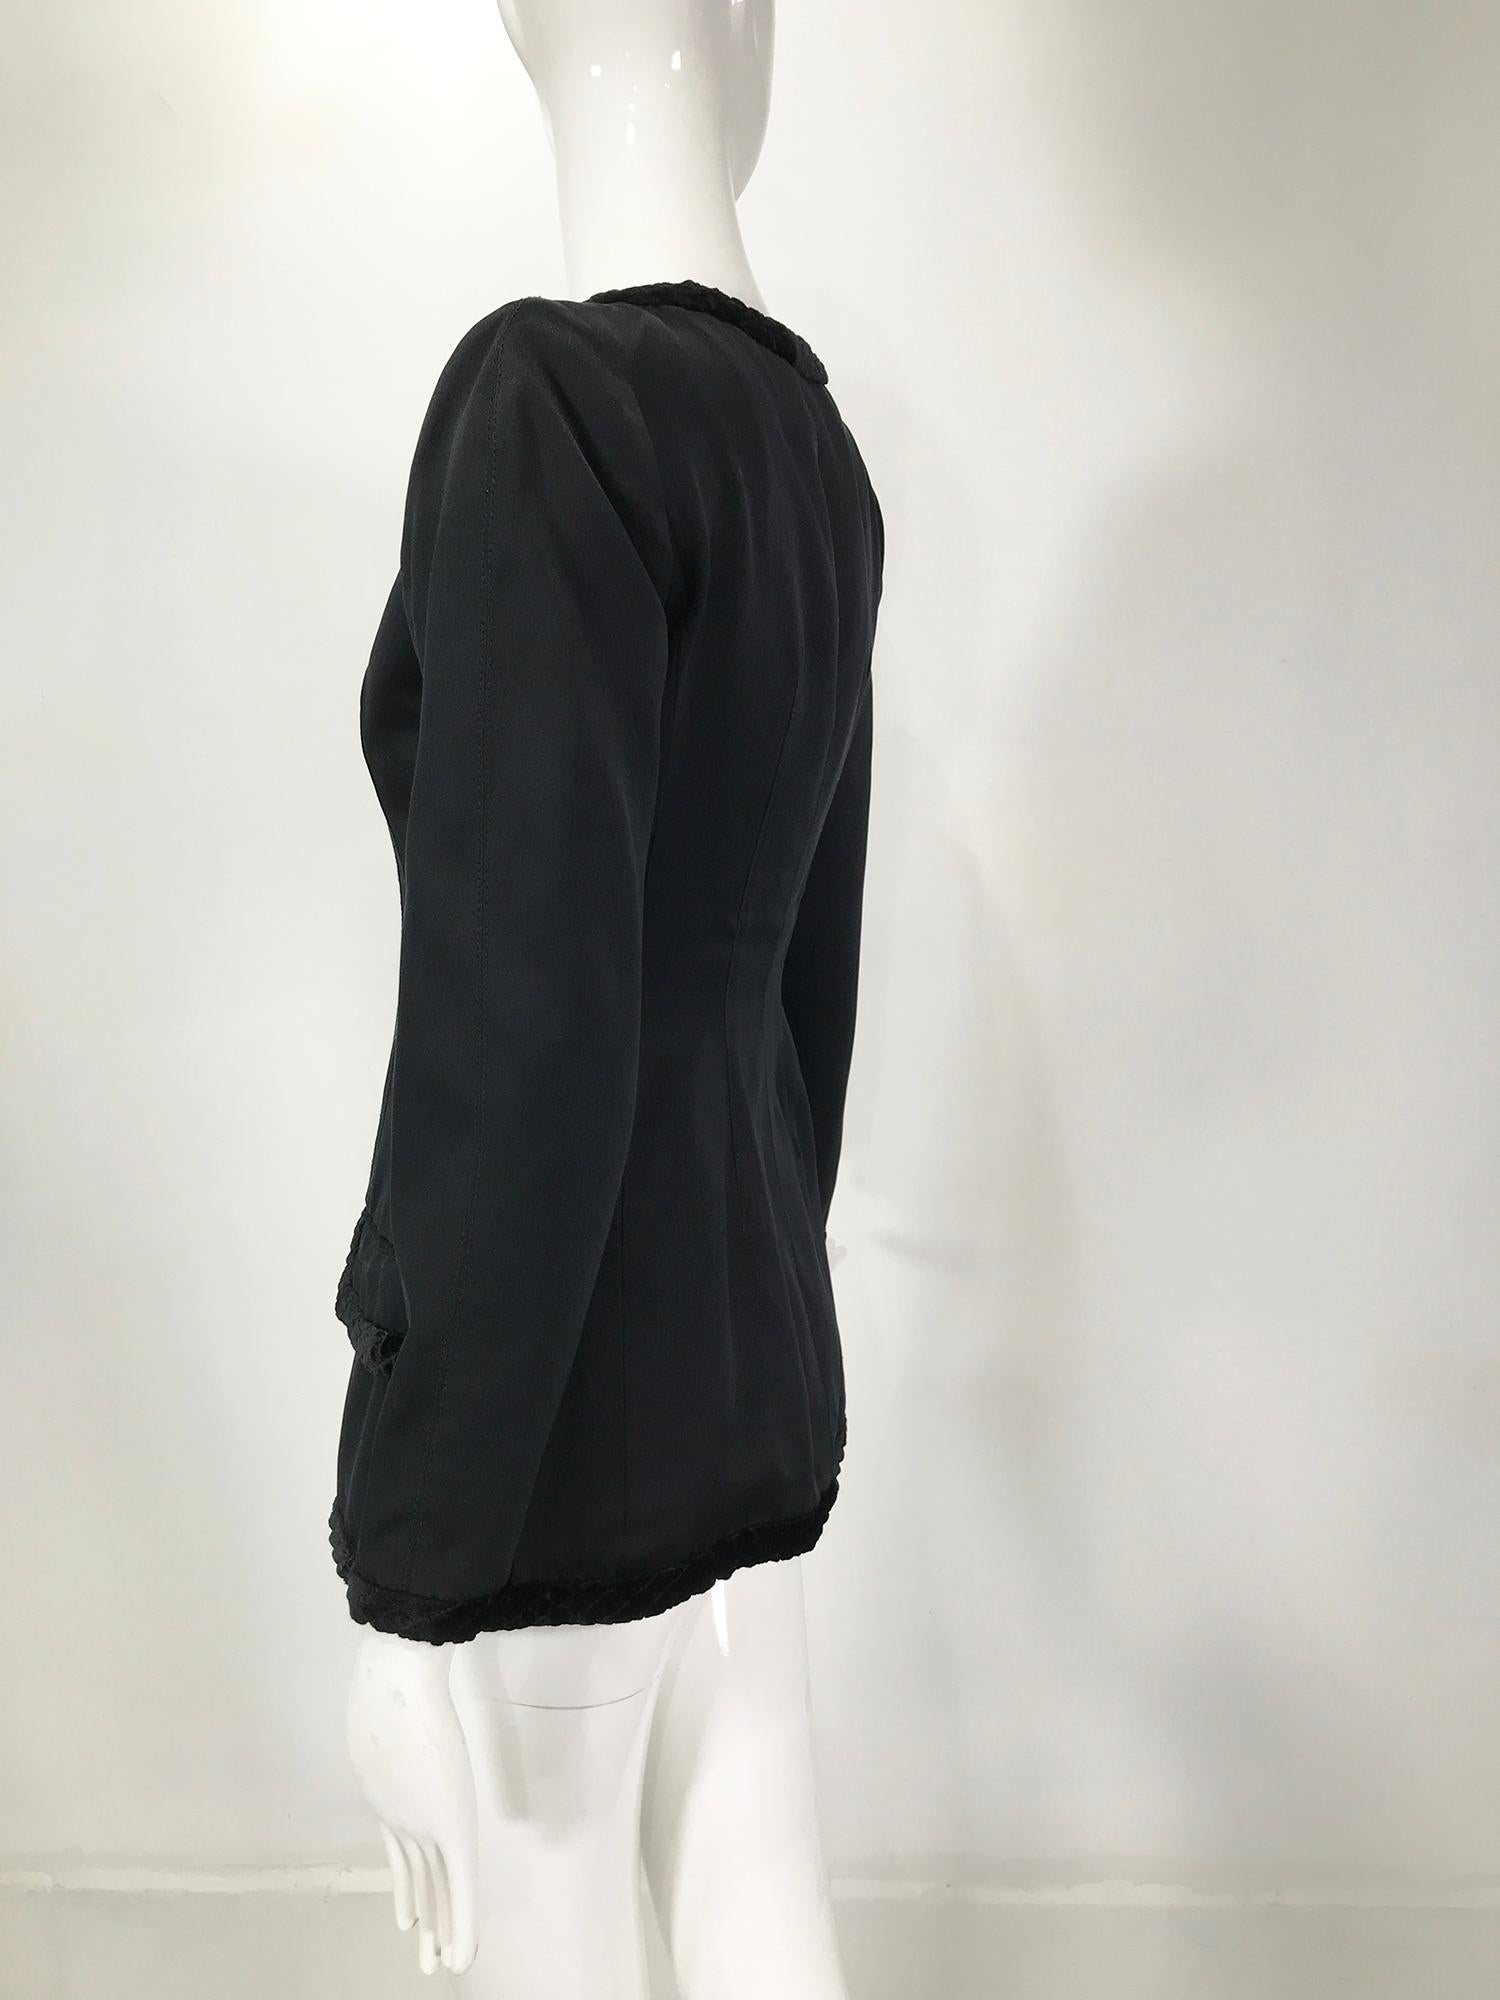 Women's Valentino Black Silk Fitted Jewel Button Evening Jacket 1990s For Sale